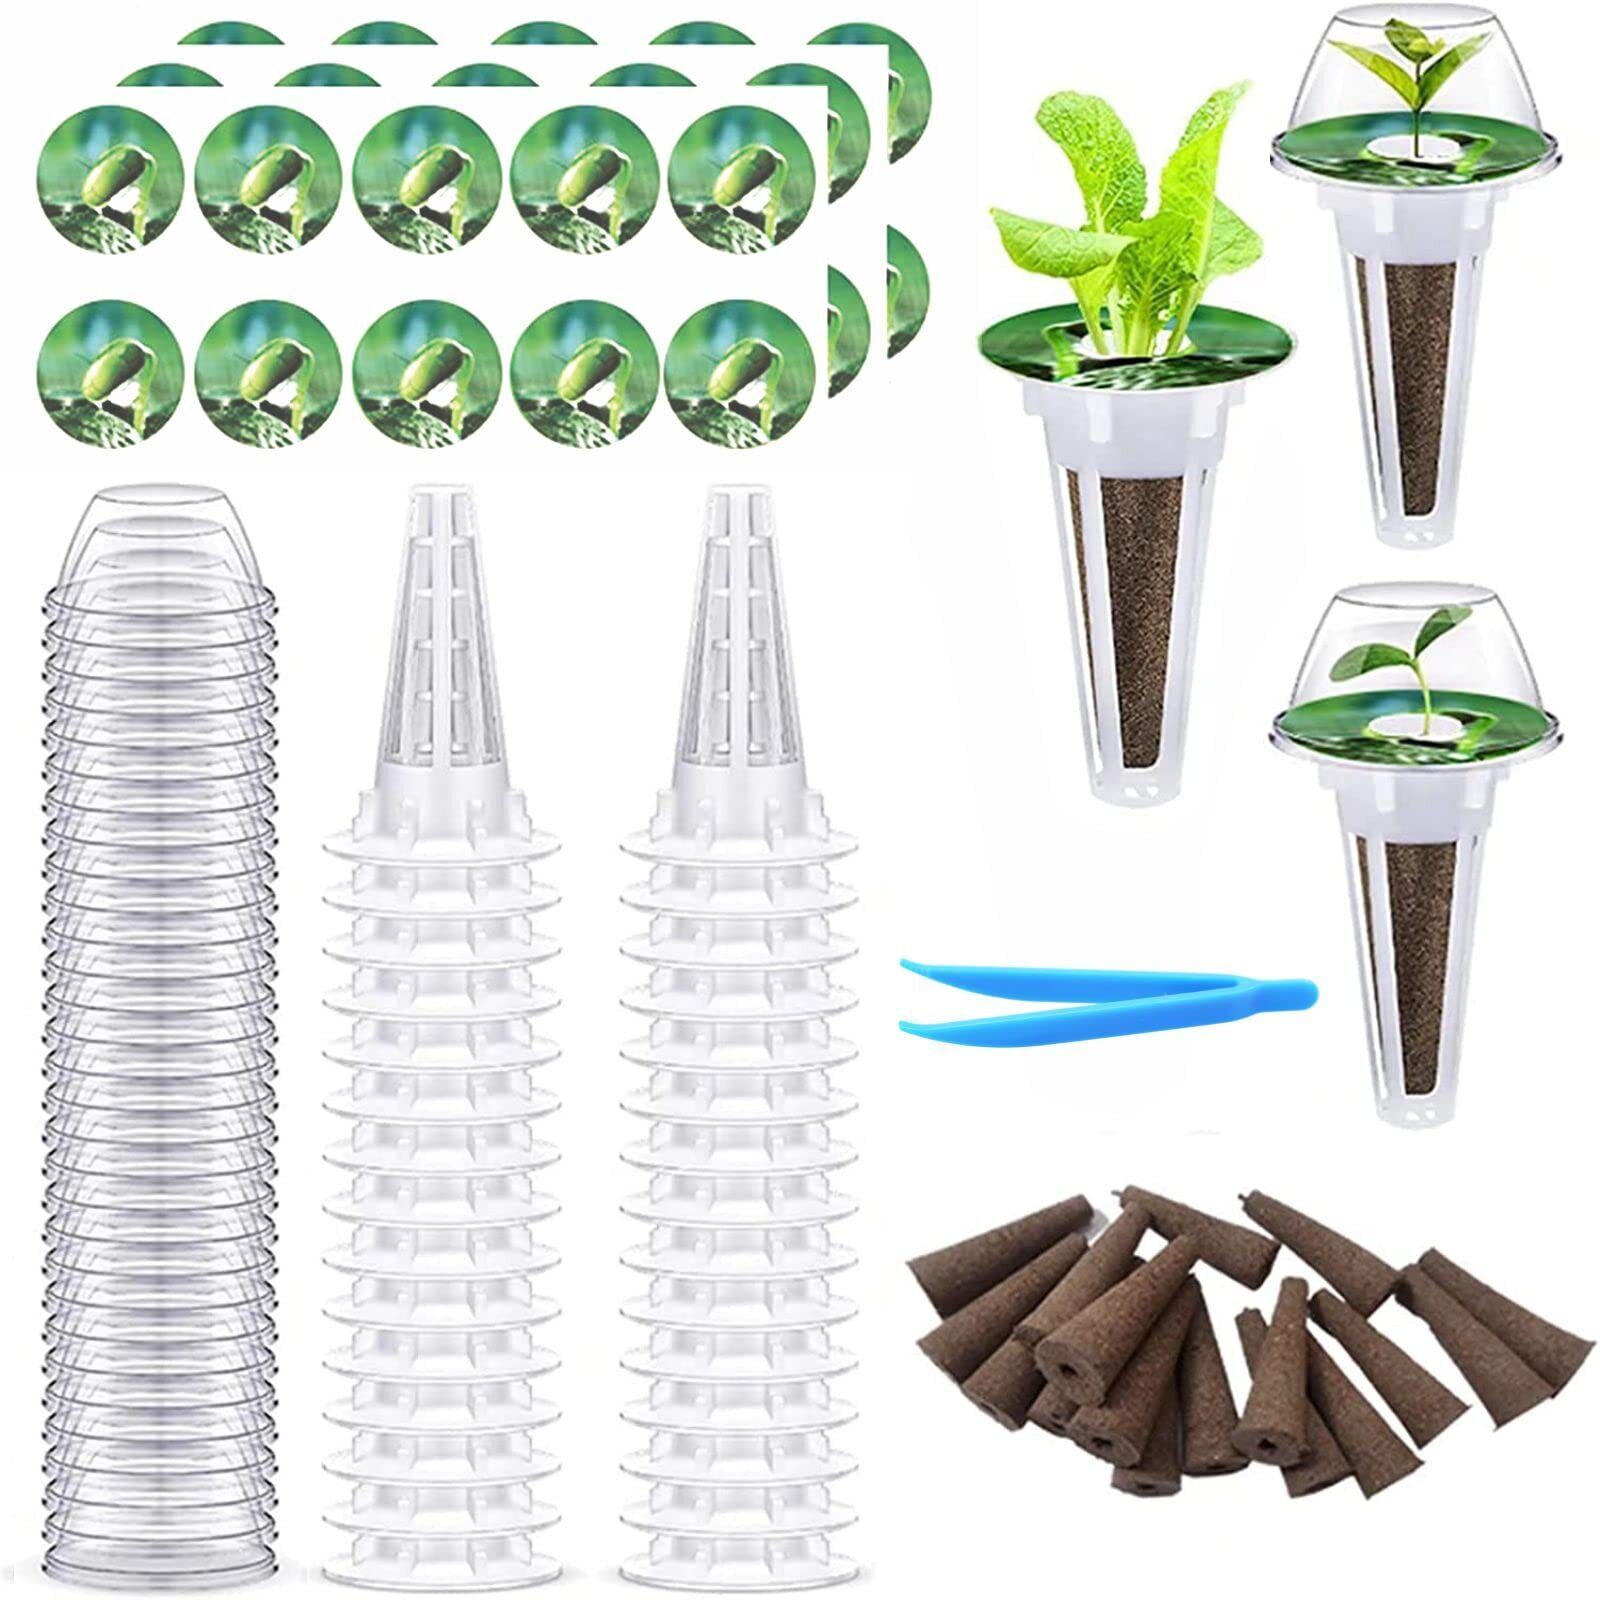 XFVFXZZ 121 Pcs Seed Pods Kit Compatible with Aerogarden, Suitable for Hydrop...